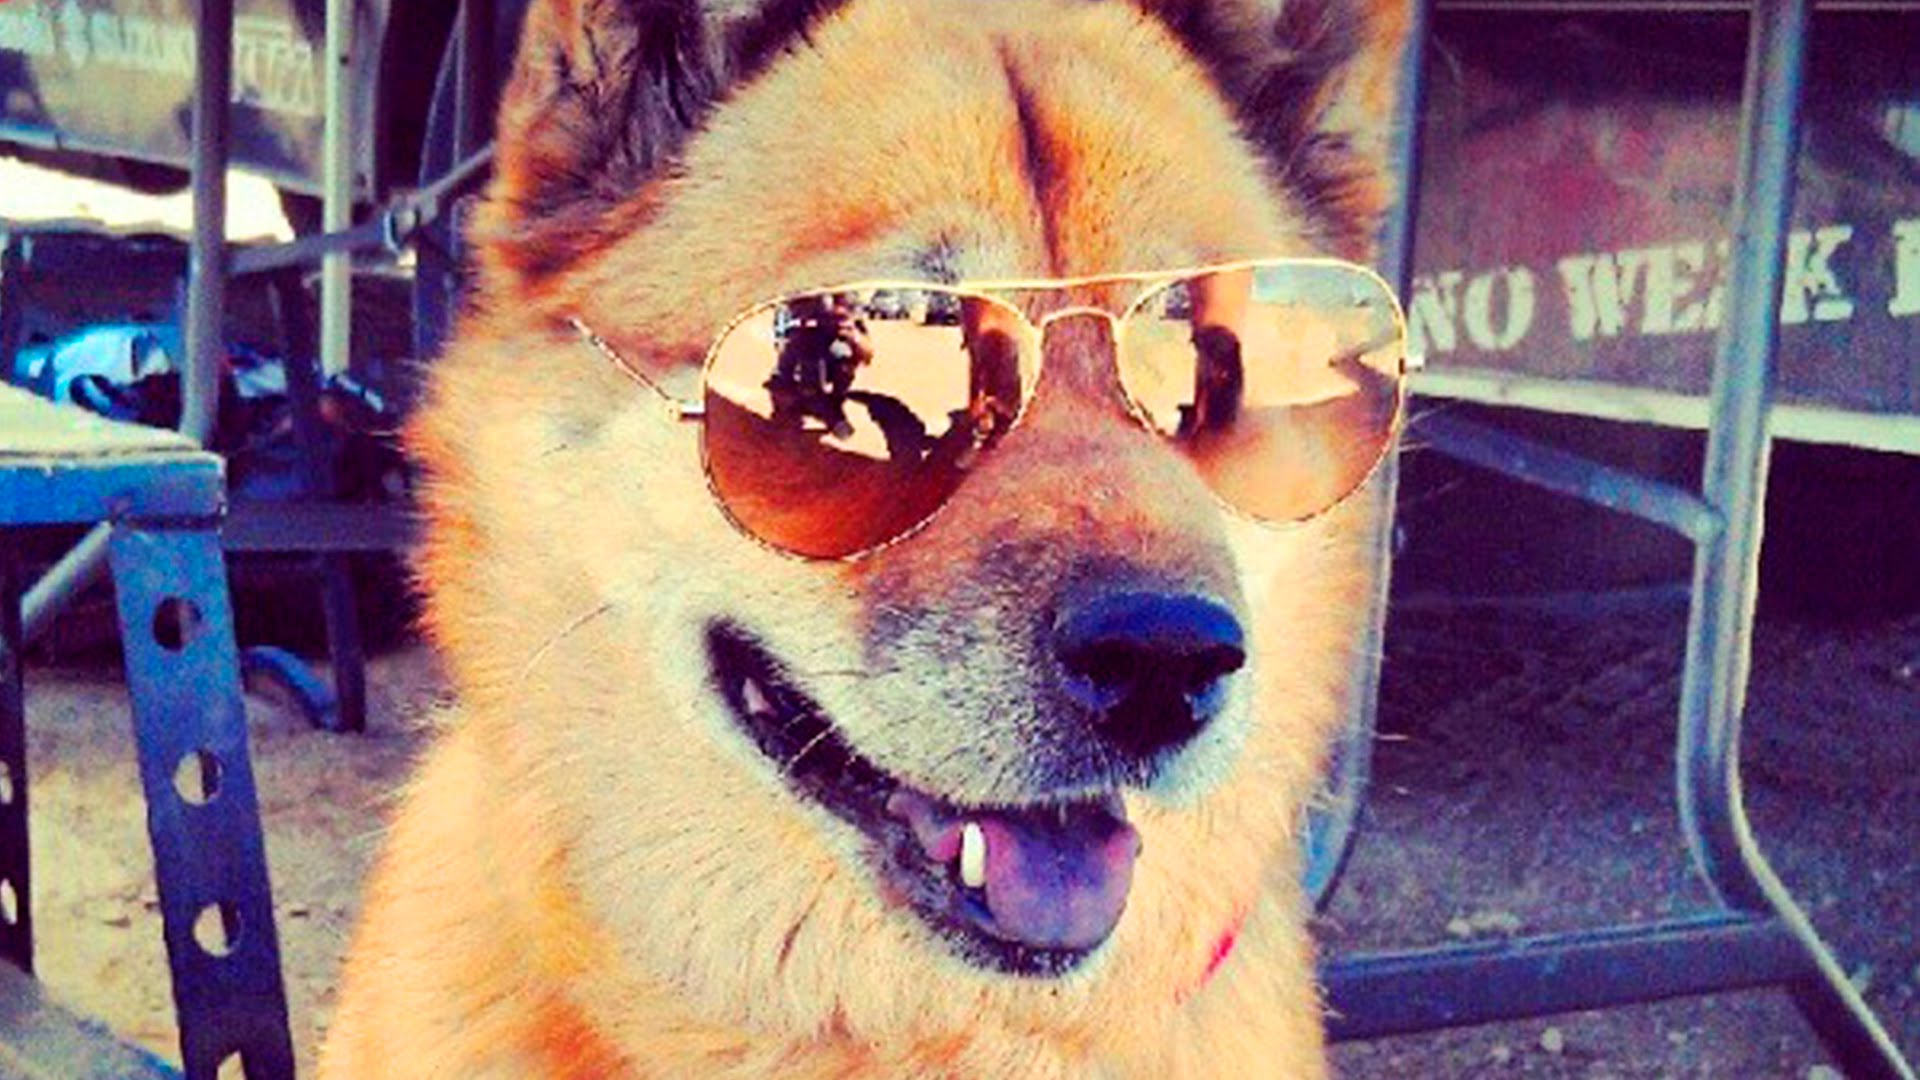 Cute Dogs With Glasses Wallpapers